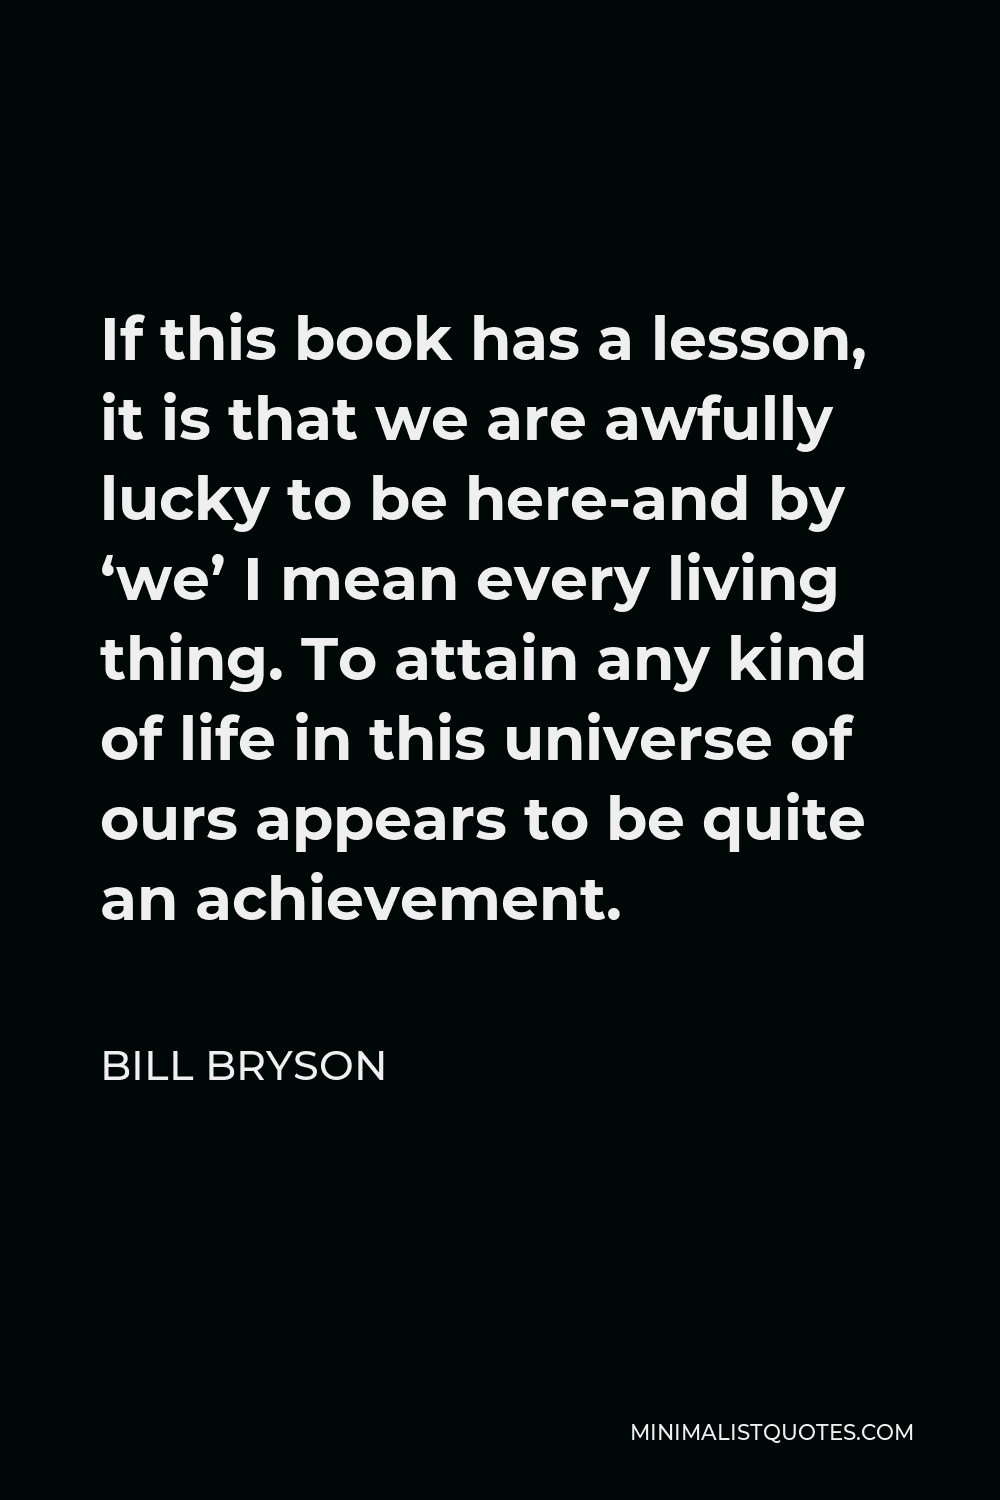 Bill Bryson Quote - If this book has a lesson, it is that we are awfully lucky to be here-and by ‘we’ I mean every living thing. To attain any kind of life in this universe of ours appears to be quite an achievement.